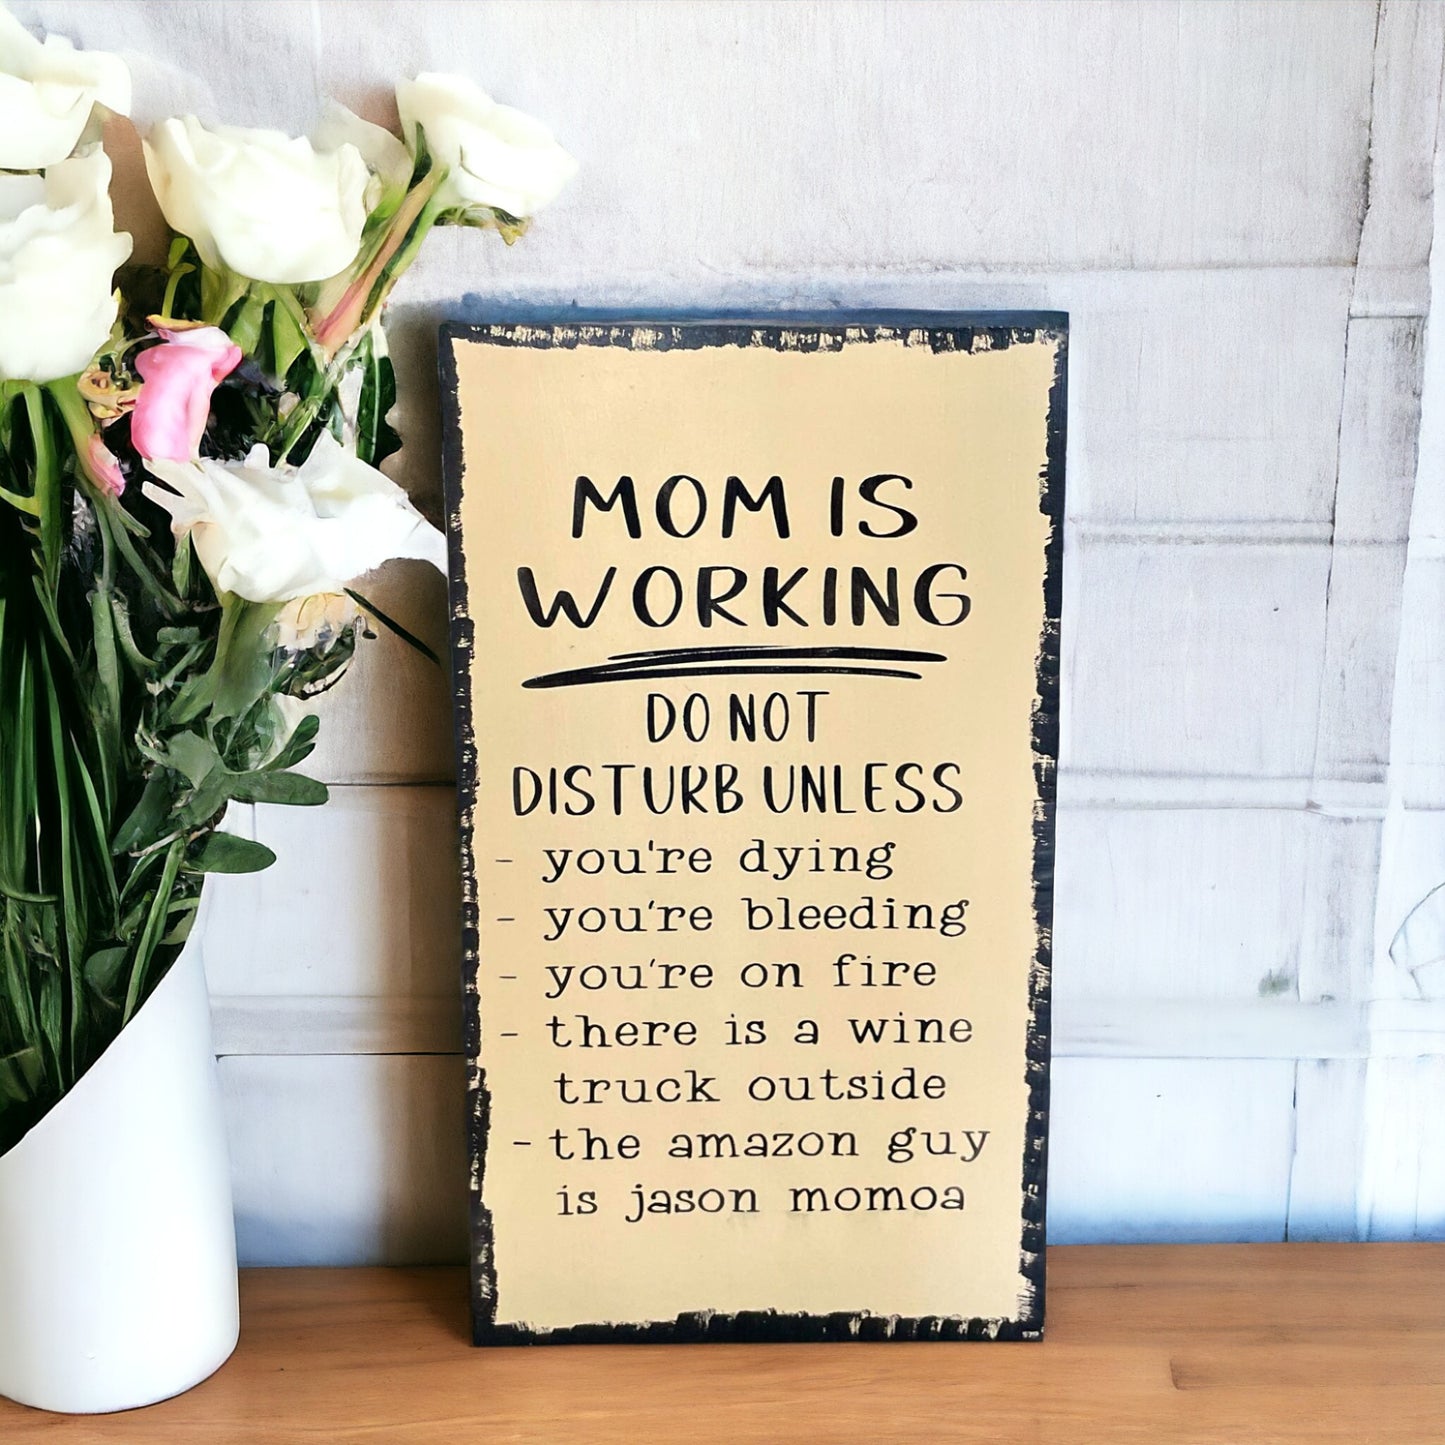 Humorous 'Mom Is Working Do Not Disturb' wooden sign for home office decor